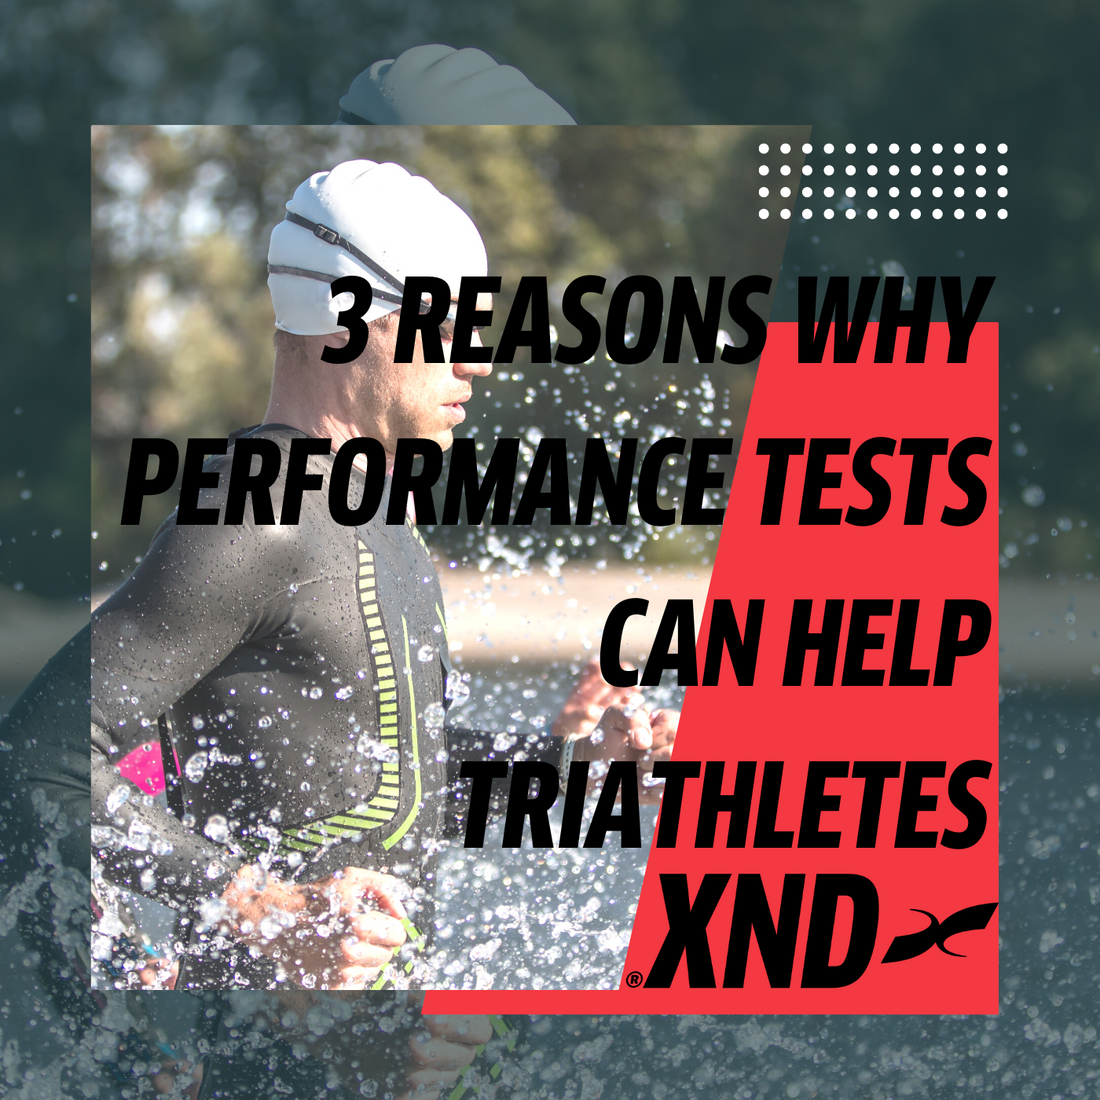 3 reasons why performance testing is right for triathletes